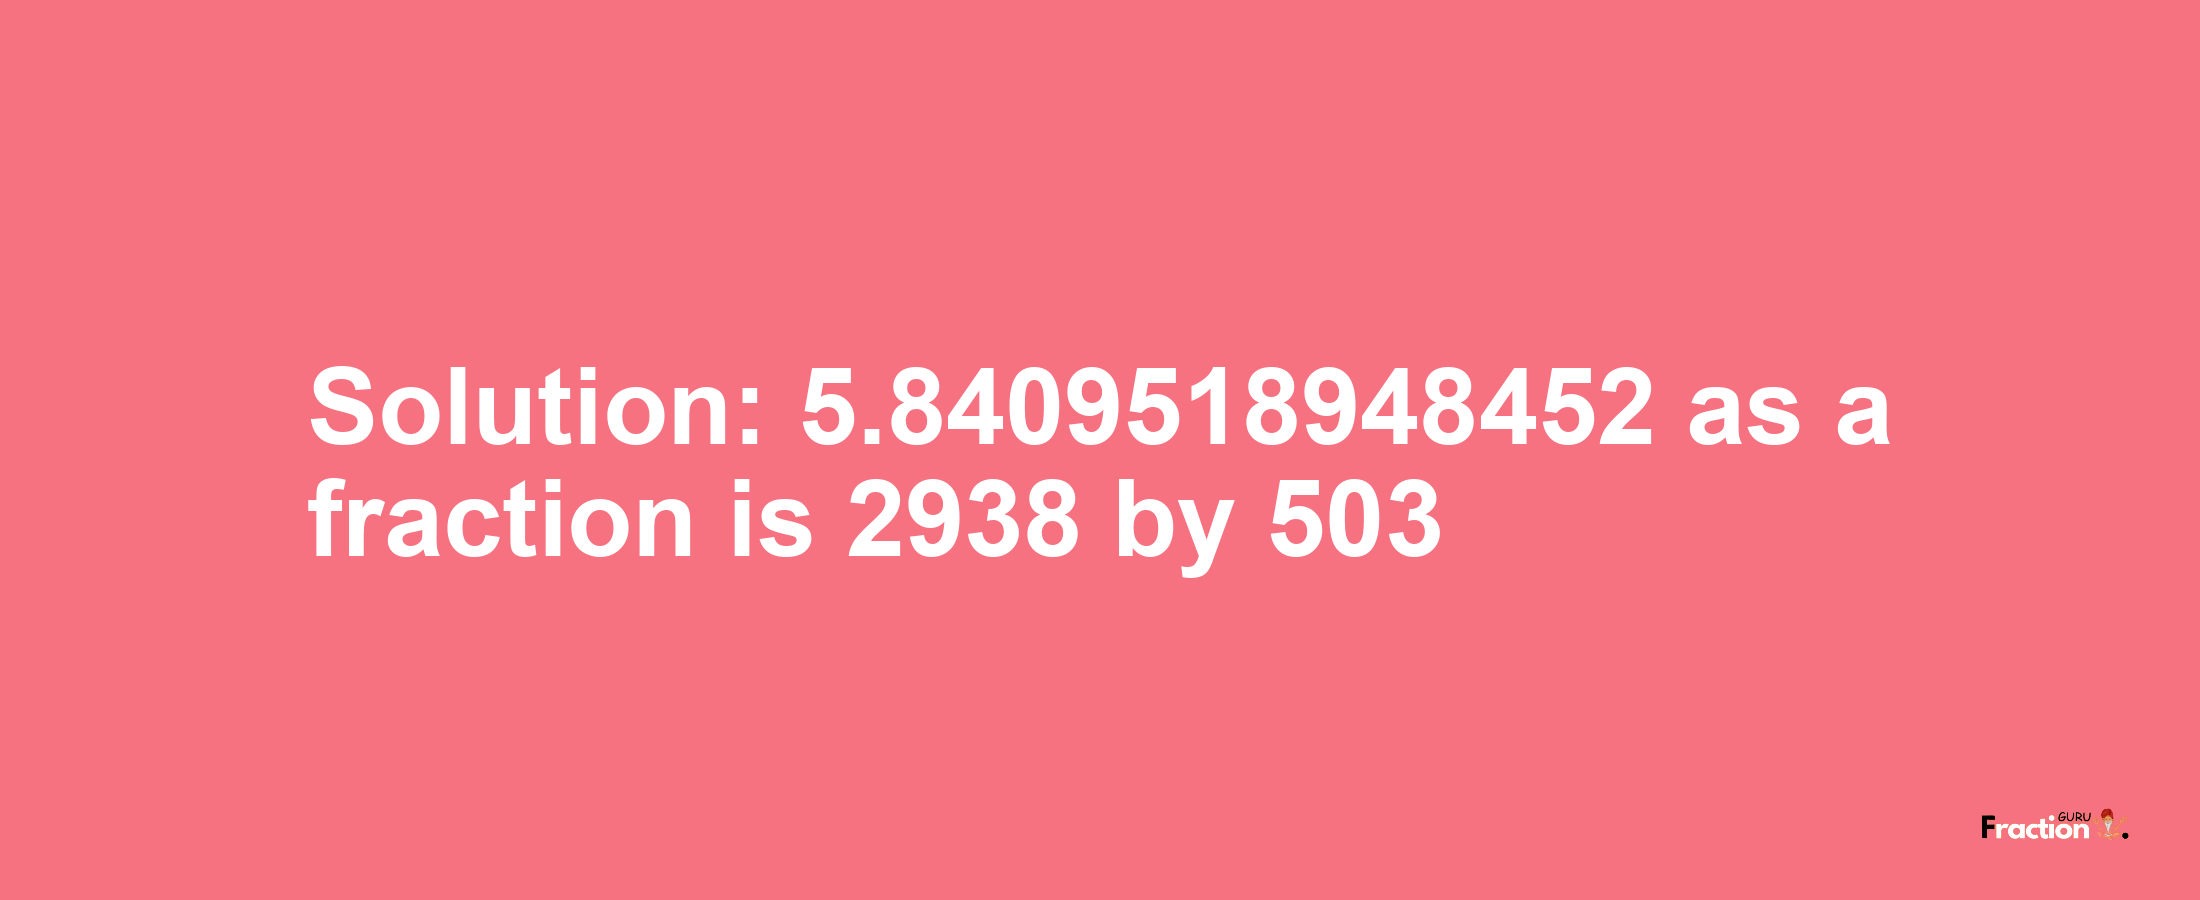 Solution:5.8409518948452 as a fraction is 2938/503